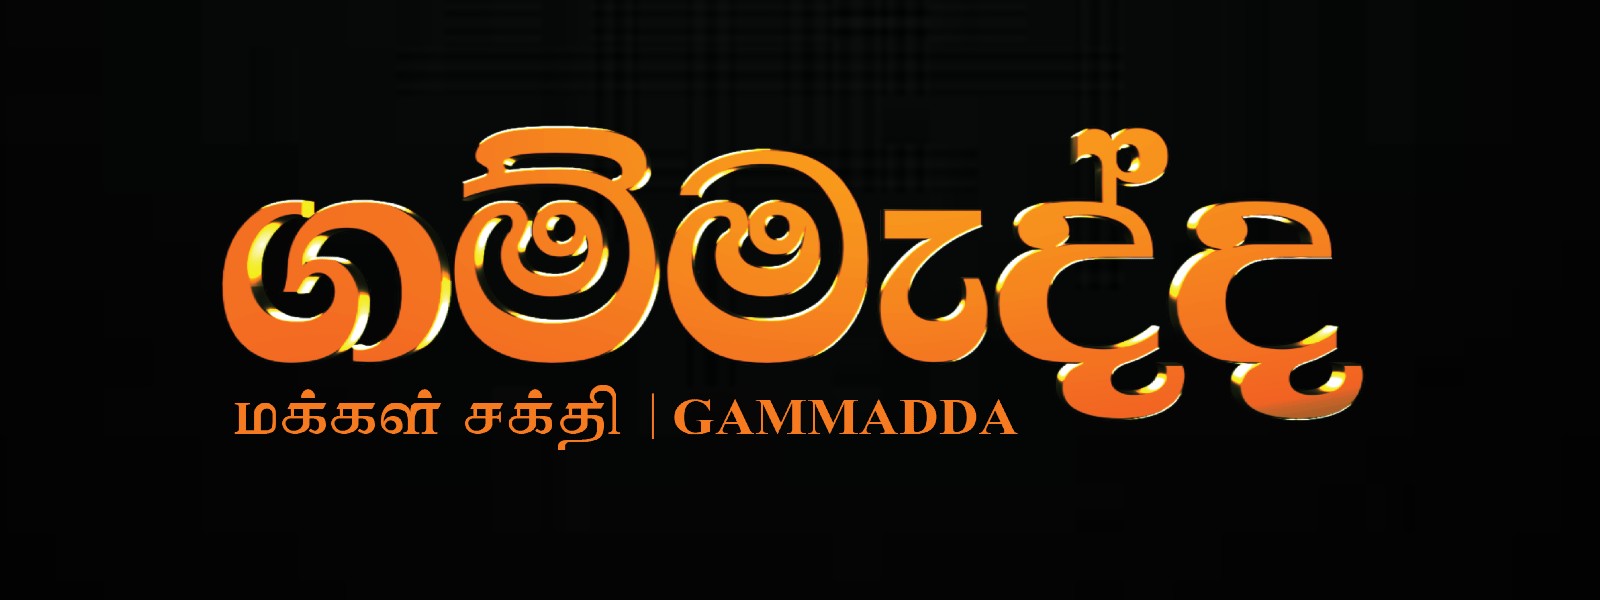 Gammadda to launch O/L classes on TV1 to support rural students